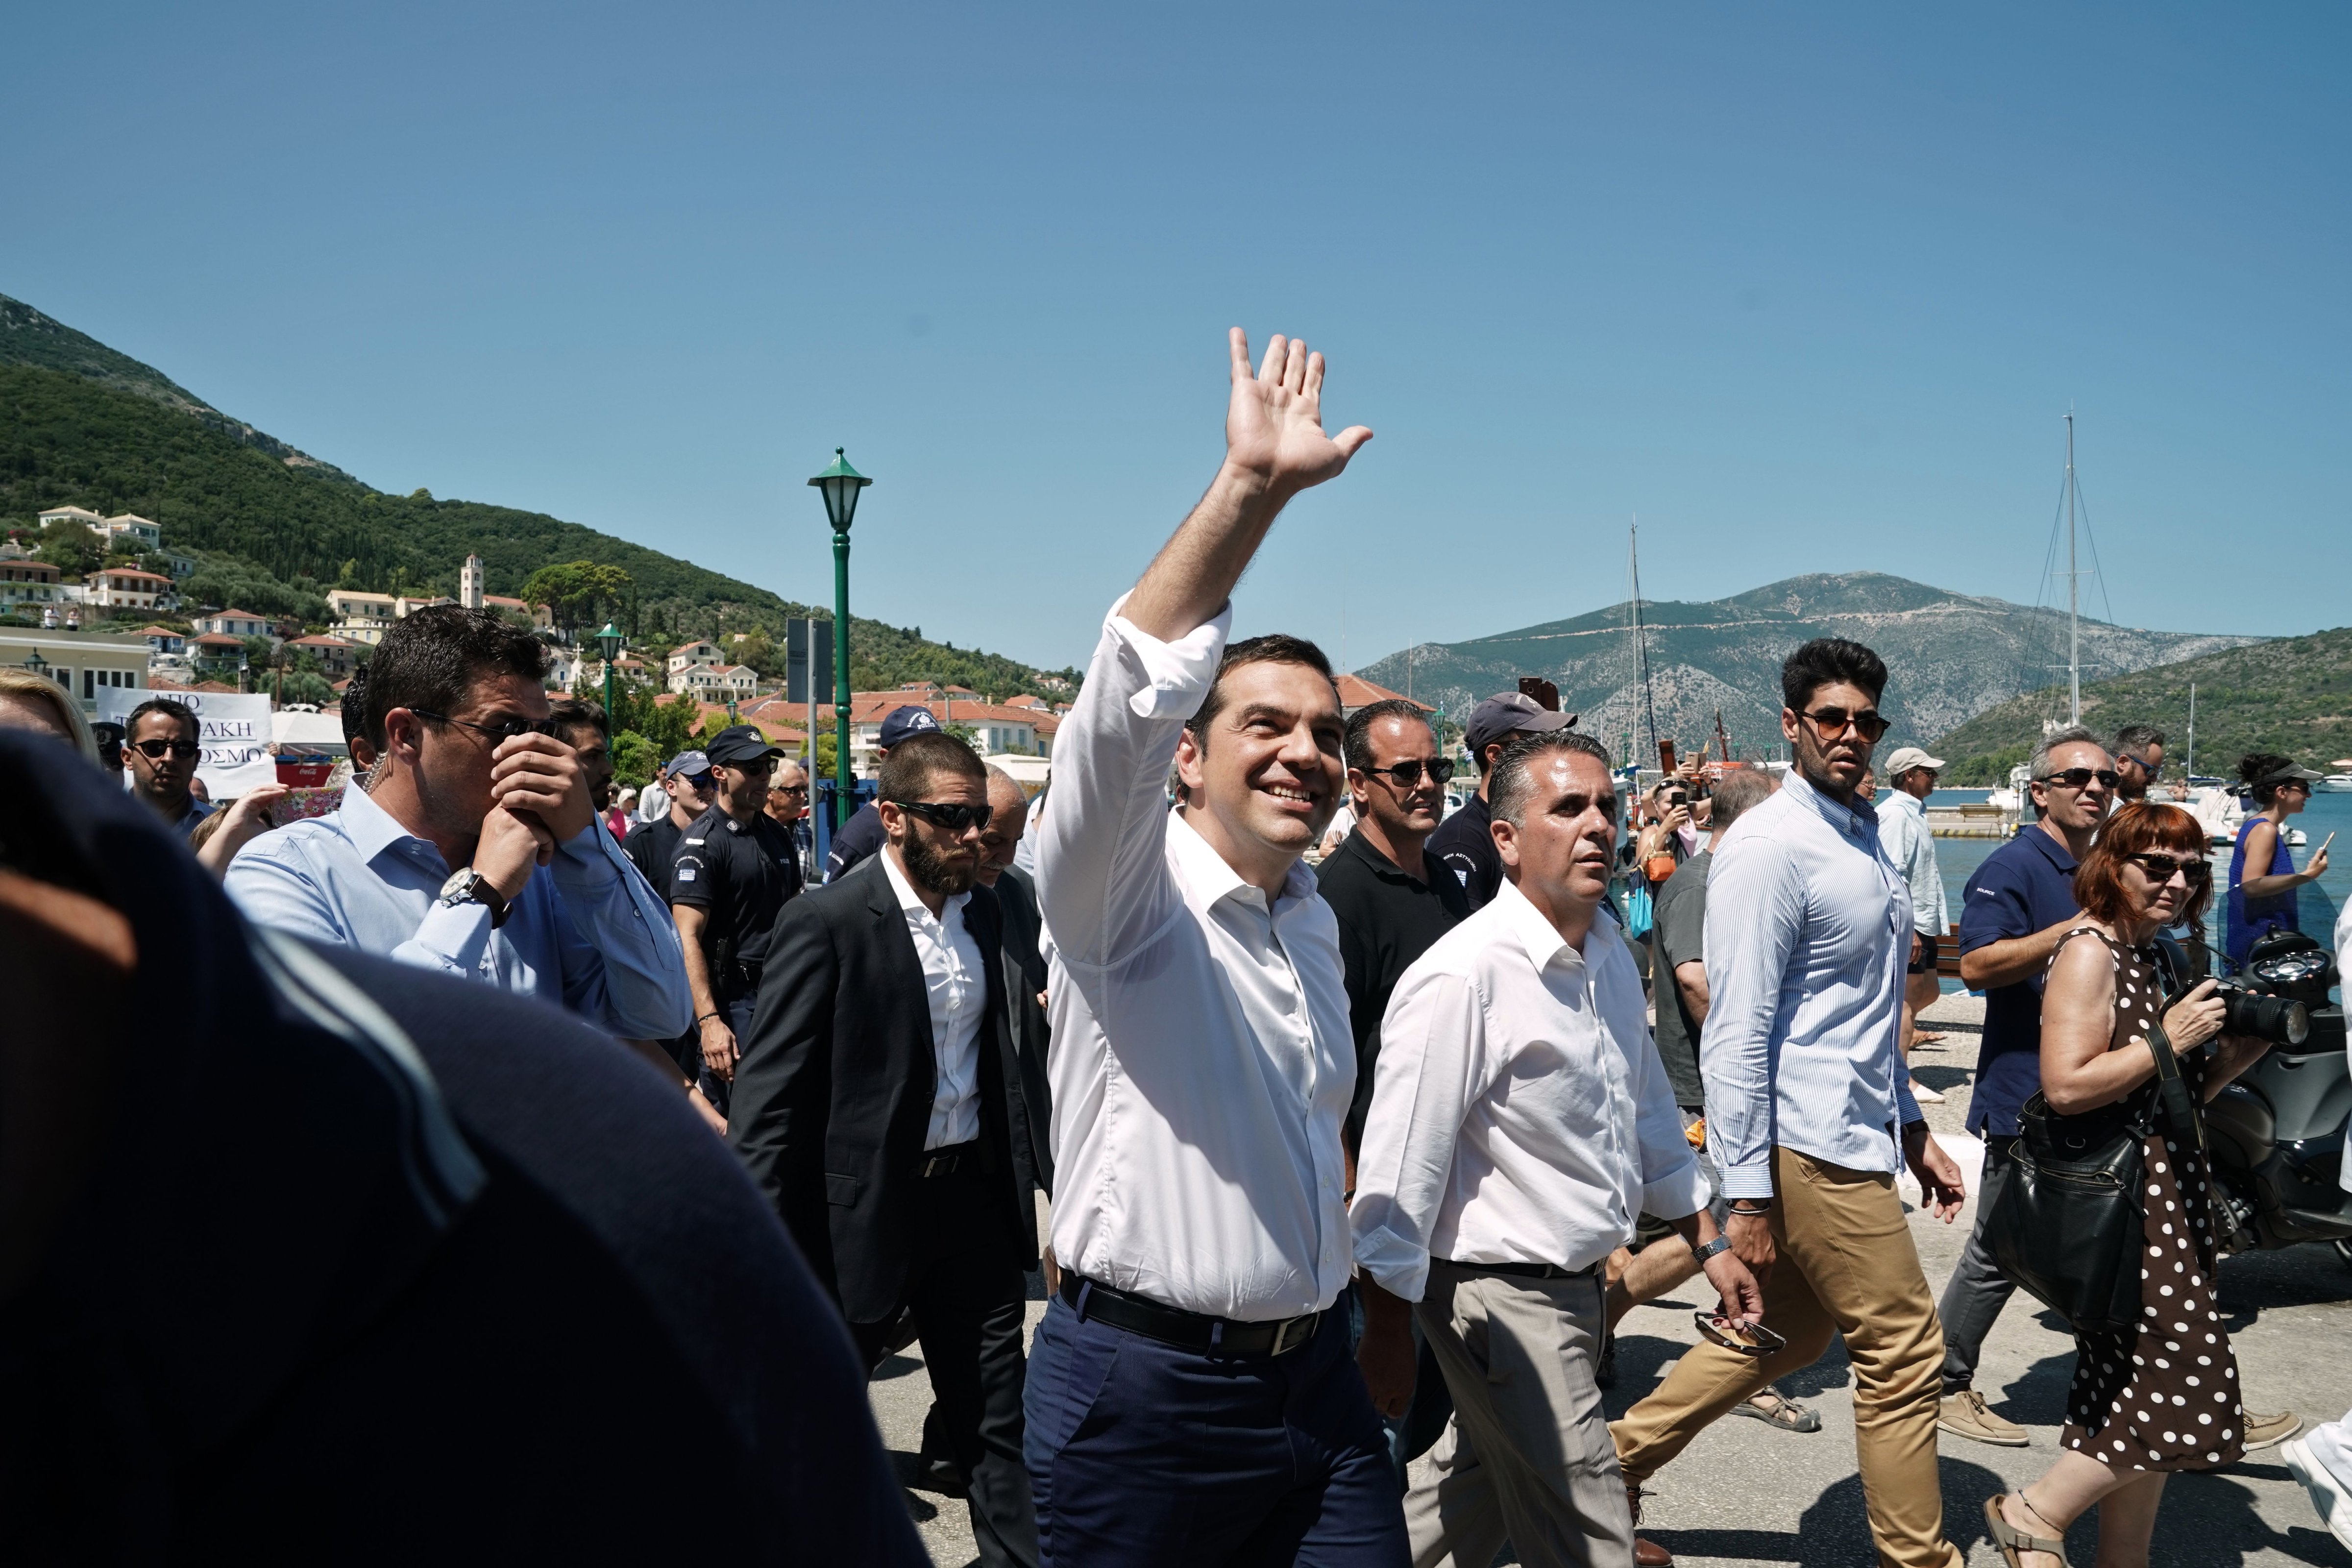 Greek Prime Minister Alexis Tsipras waves at supporters on Ithaca island, on August 21, 2018. (Menelaos Myrillas—AFP/Getty Images)